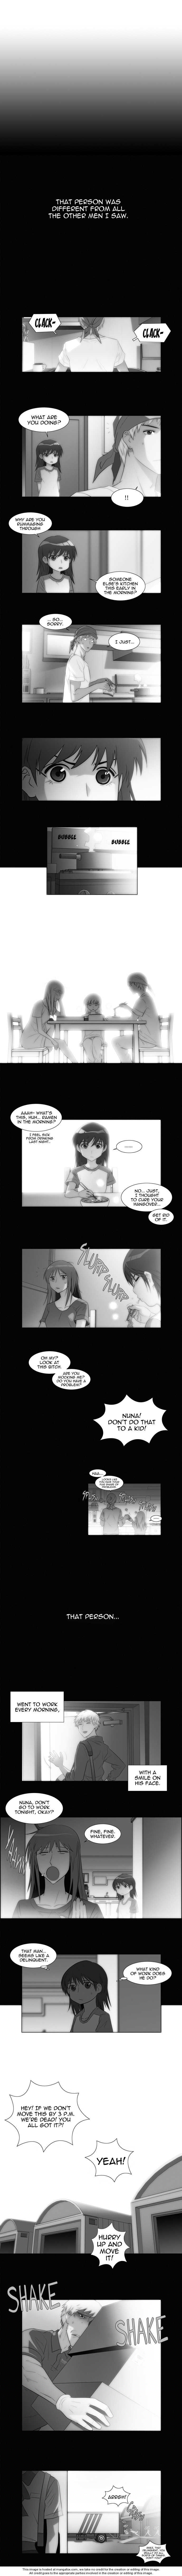 Melo Holic Chapter 041 page 2